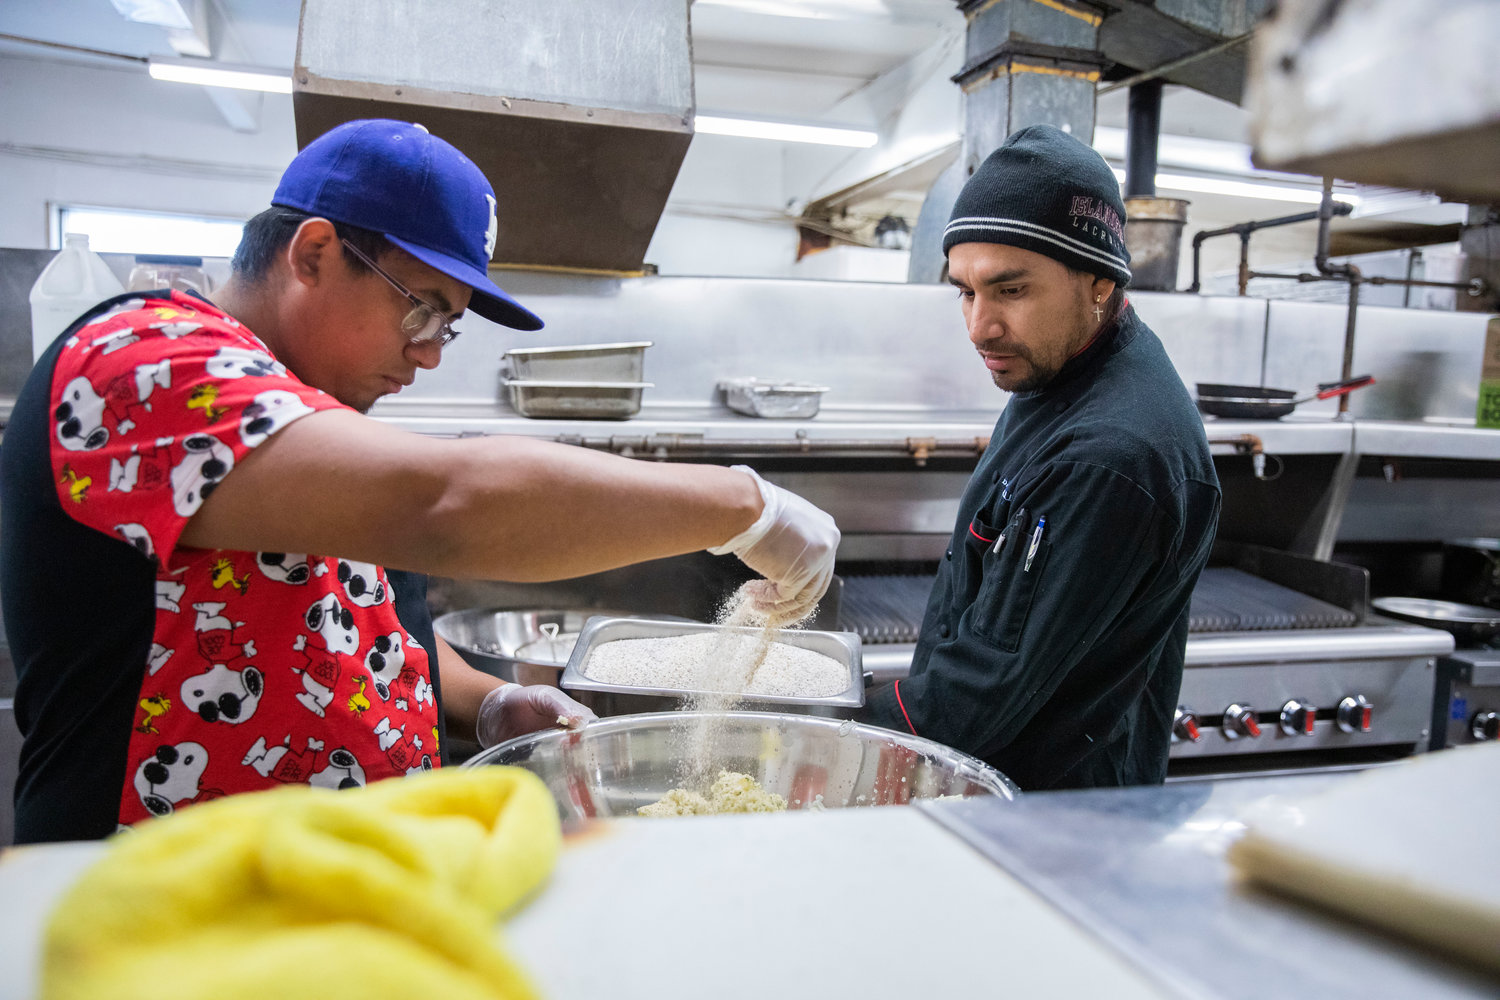 Owner and Head Chef Eyner Cardona supervises as Daniel Flores adds herbs and seasoning to mashed potatoes at Ocean Prime Family Restaurant in Chehalis Monday morning.